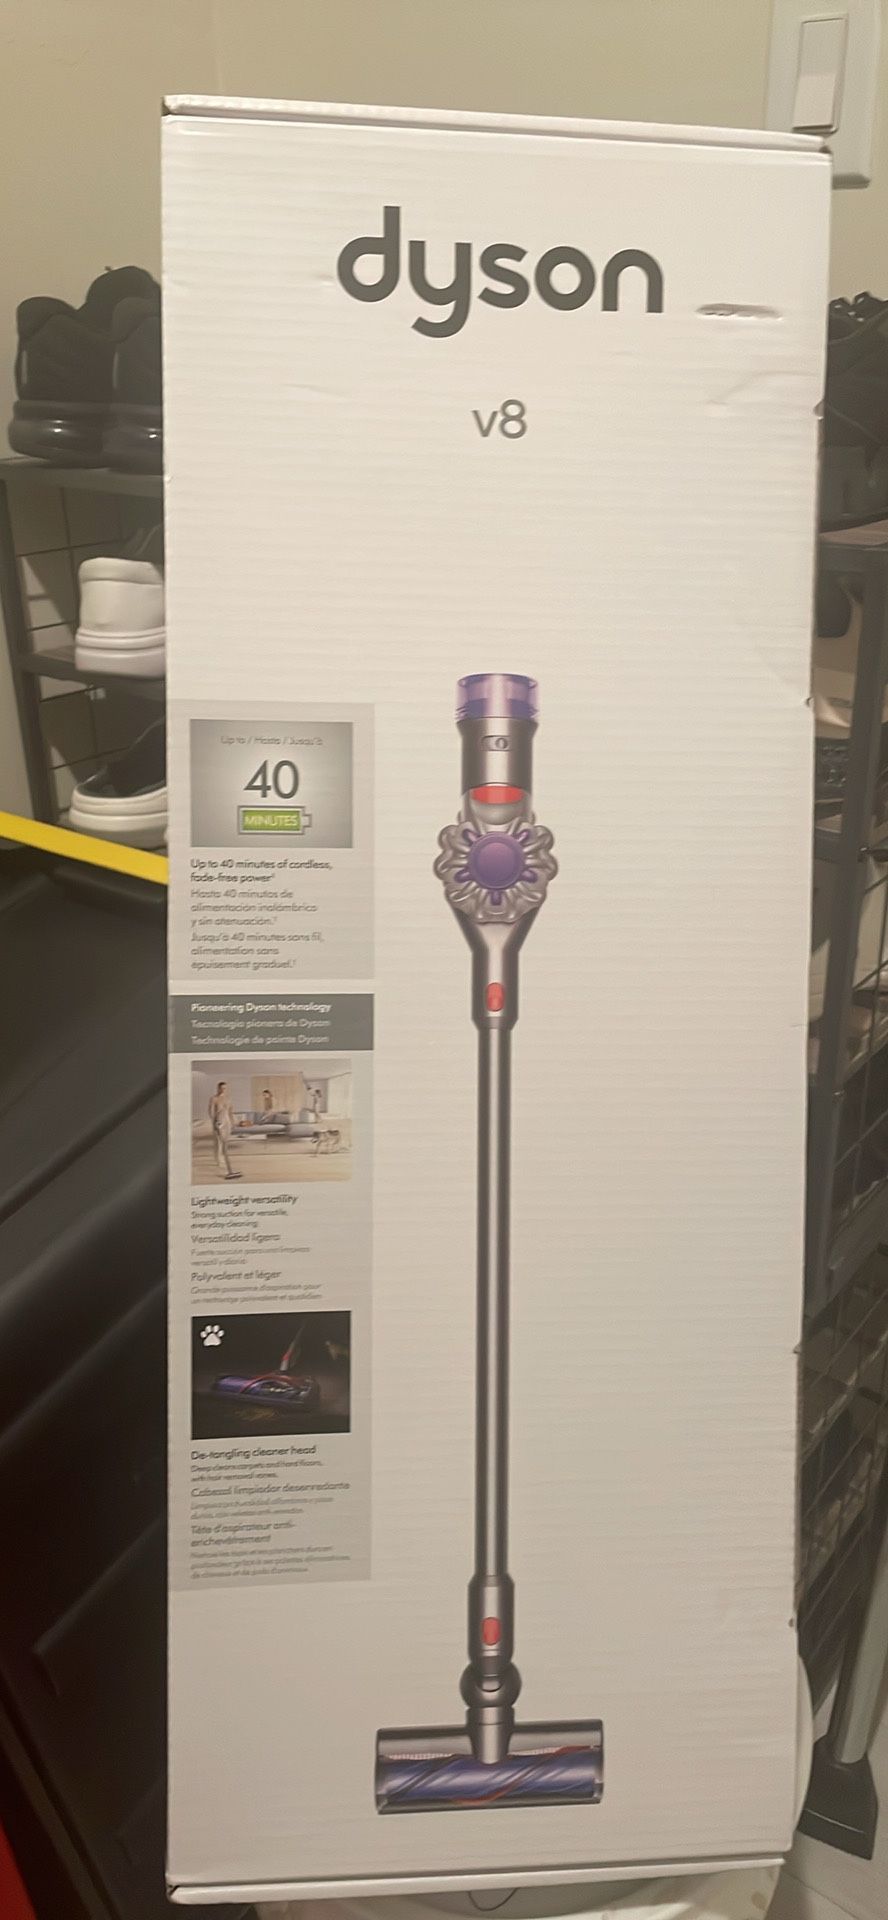 Brand New, Never Opened Dyson V8 Cordless Stick Vacuum Cleaner. Sealed In Original Box,  Paid Over $500, Asking $250 PRICE IS FIRM!!